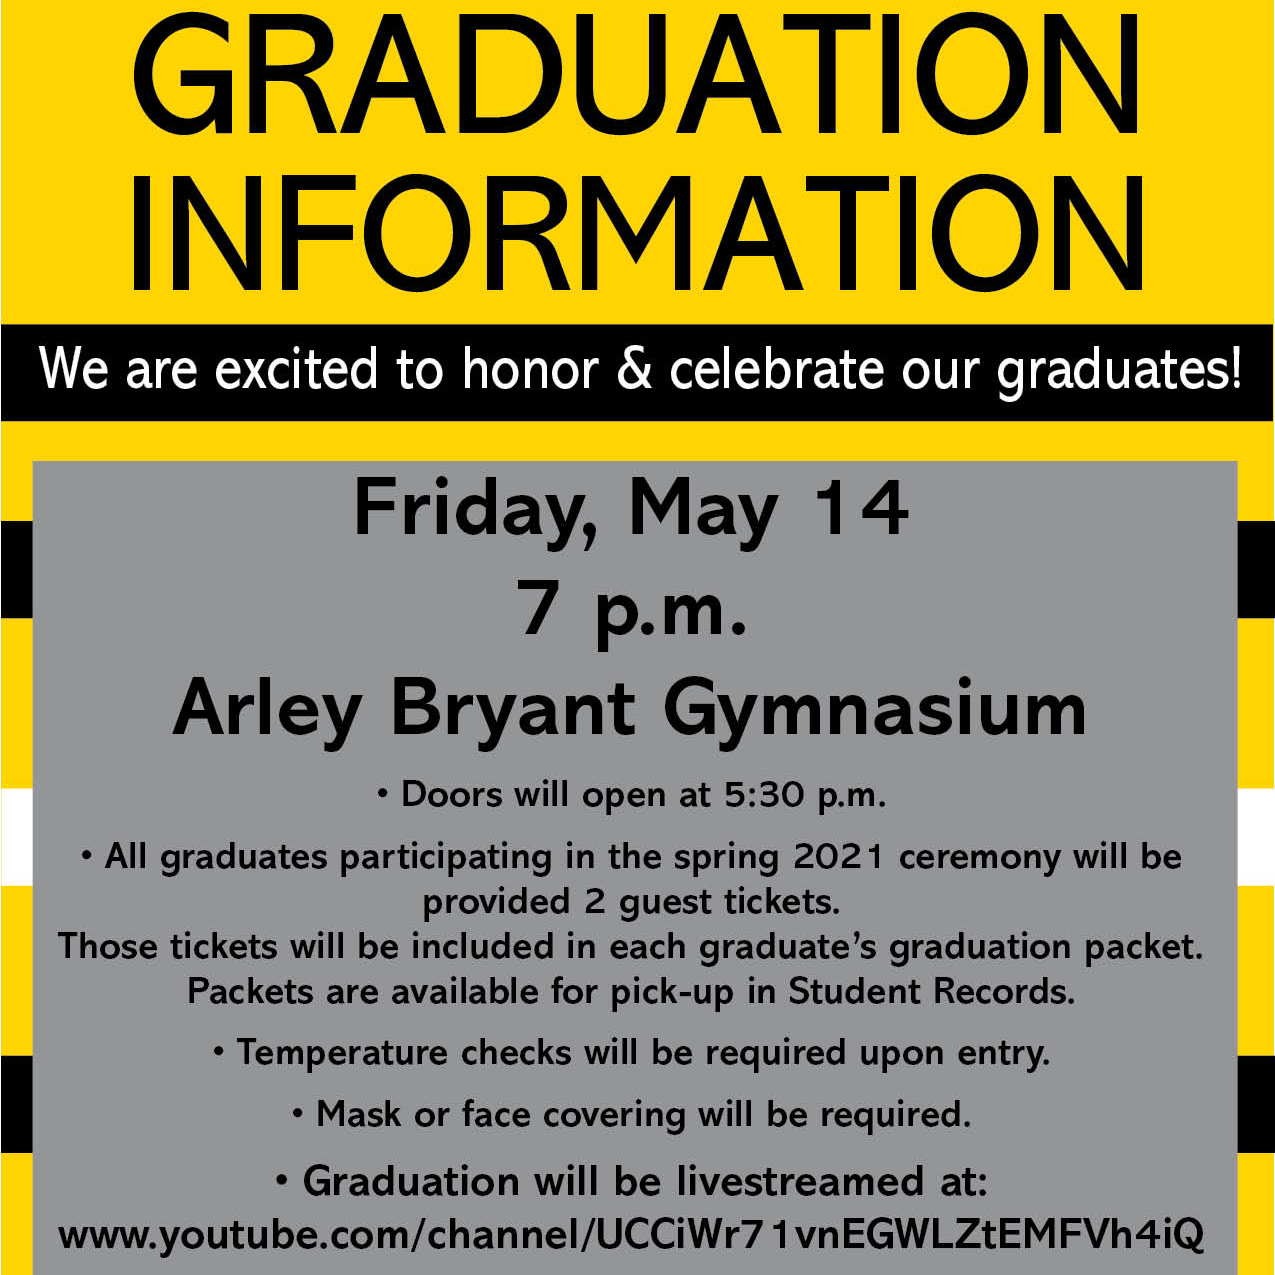 A photo of the 2021 Graduation information.